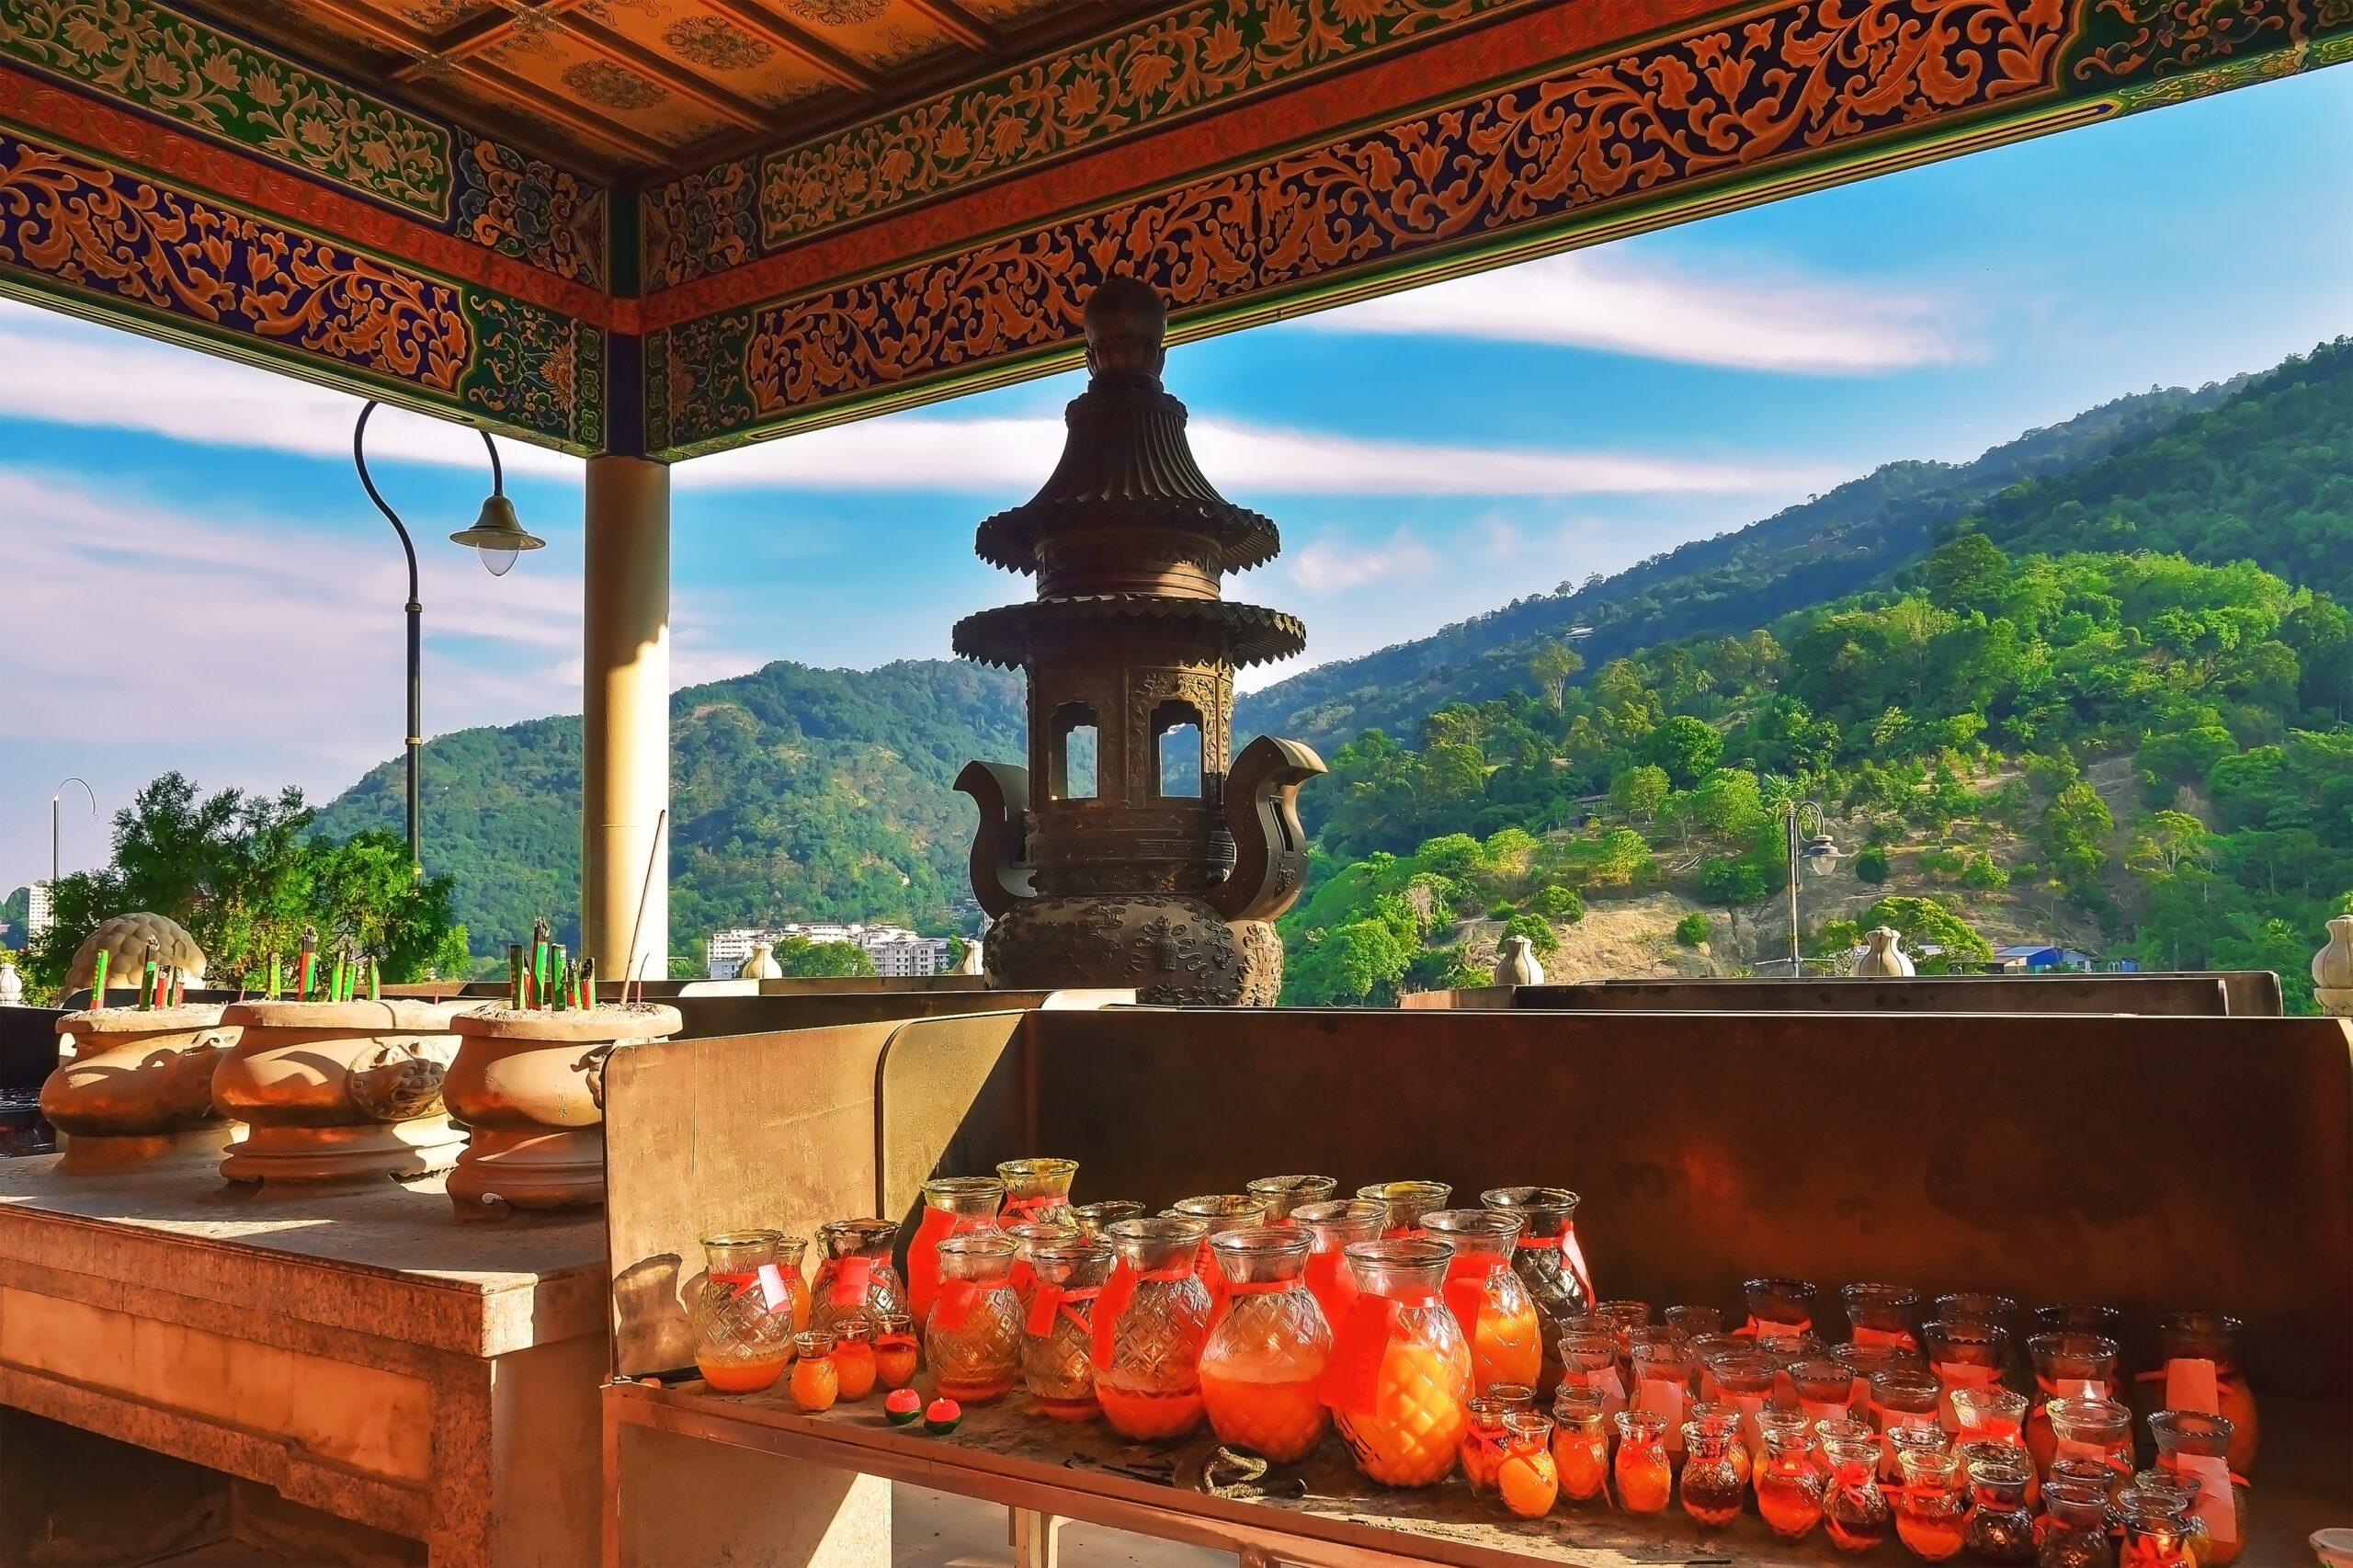 Bottles of wishing candles in Kek Lok Si temple and view of the mountain. Penang, Malaysia